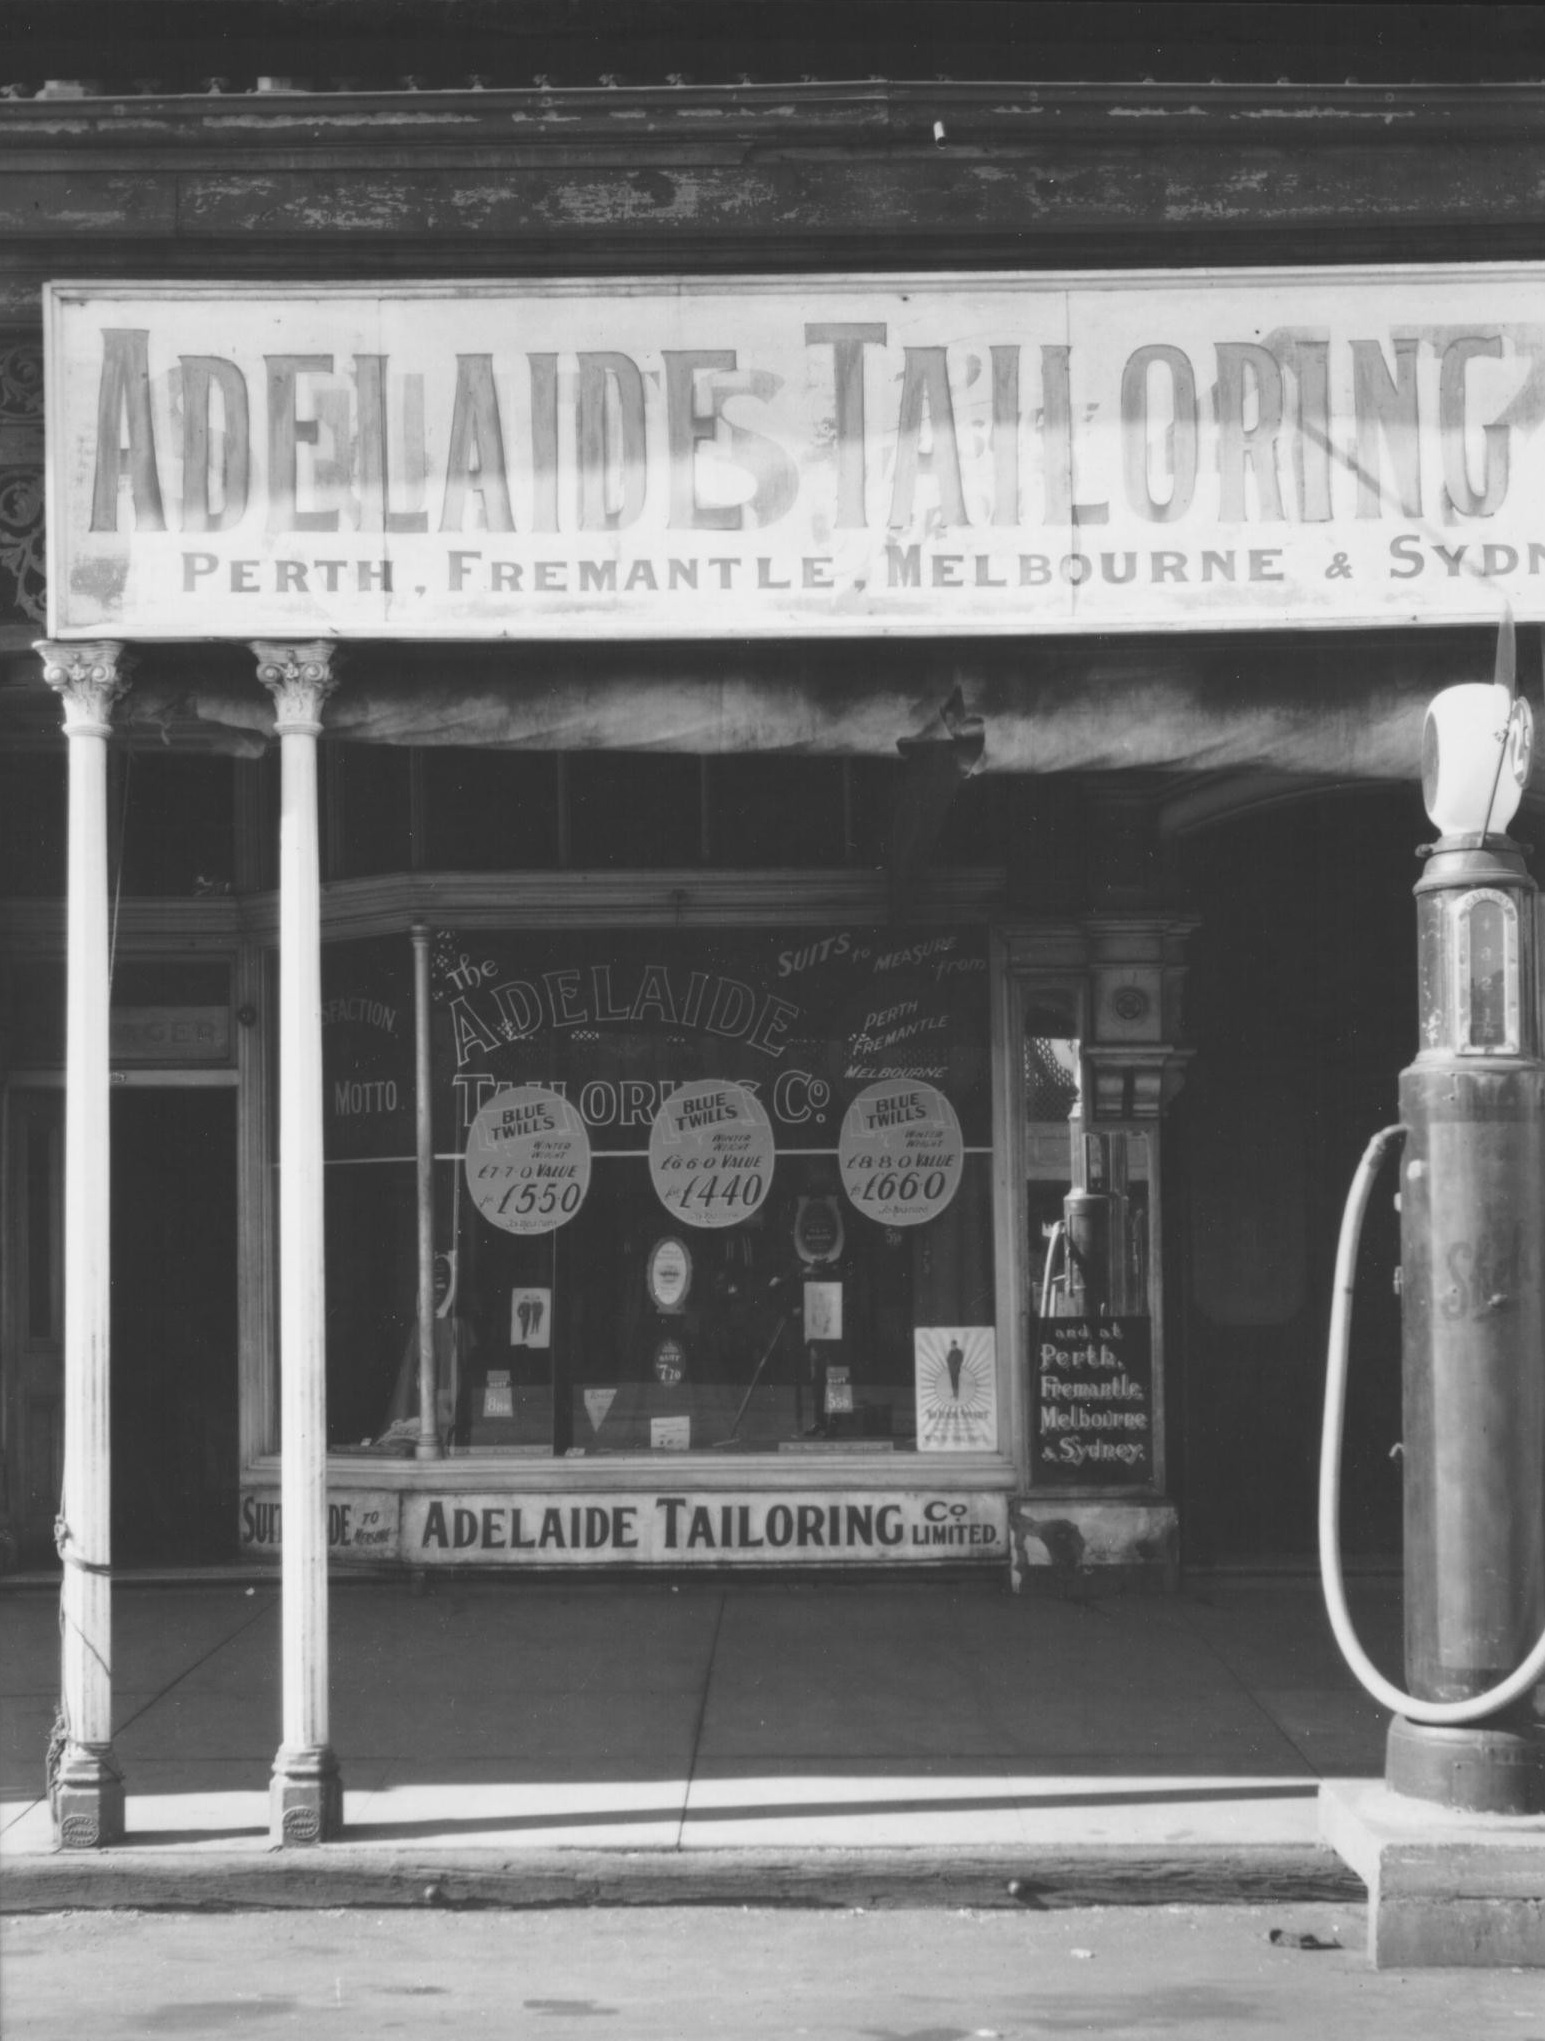 Adelaide Tailoring Co